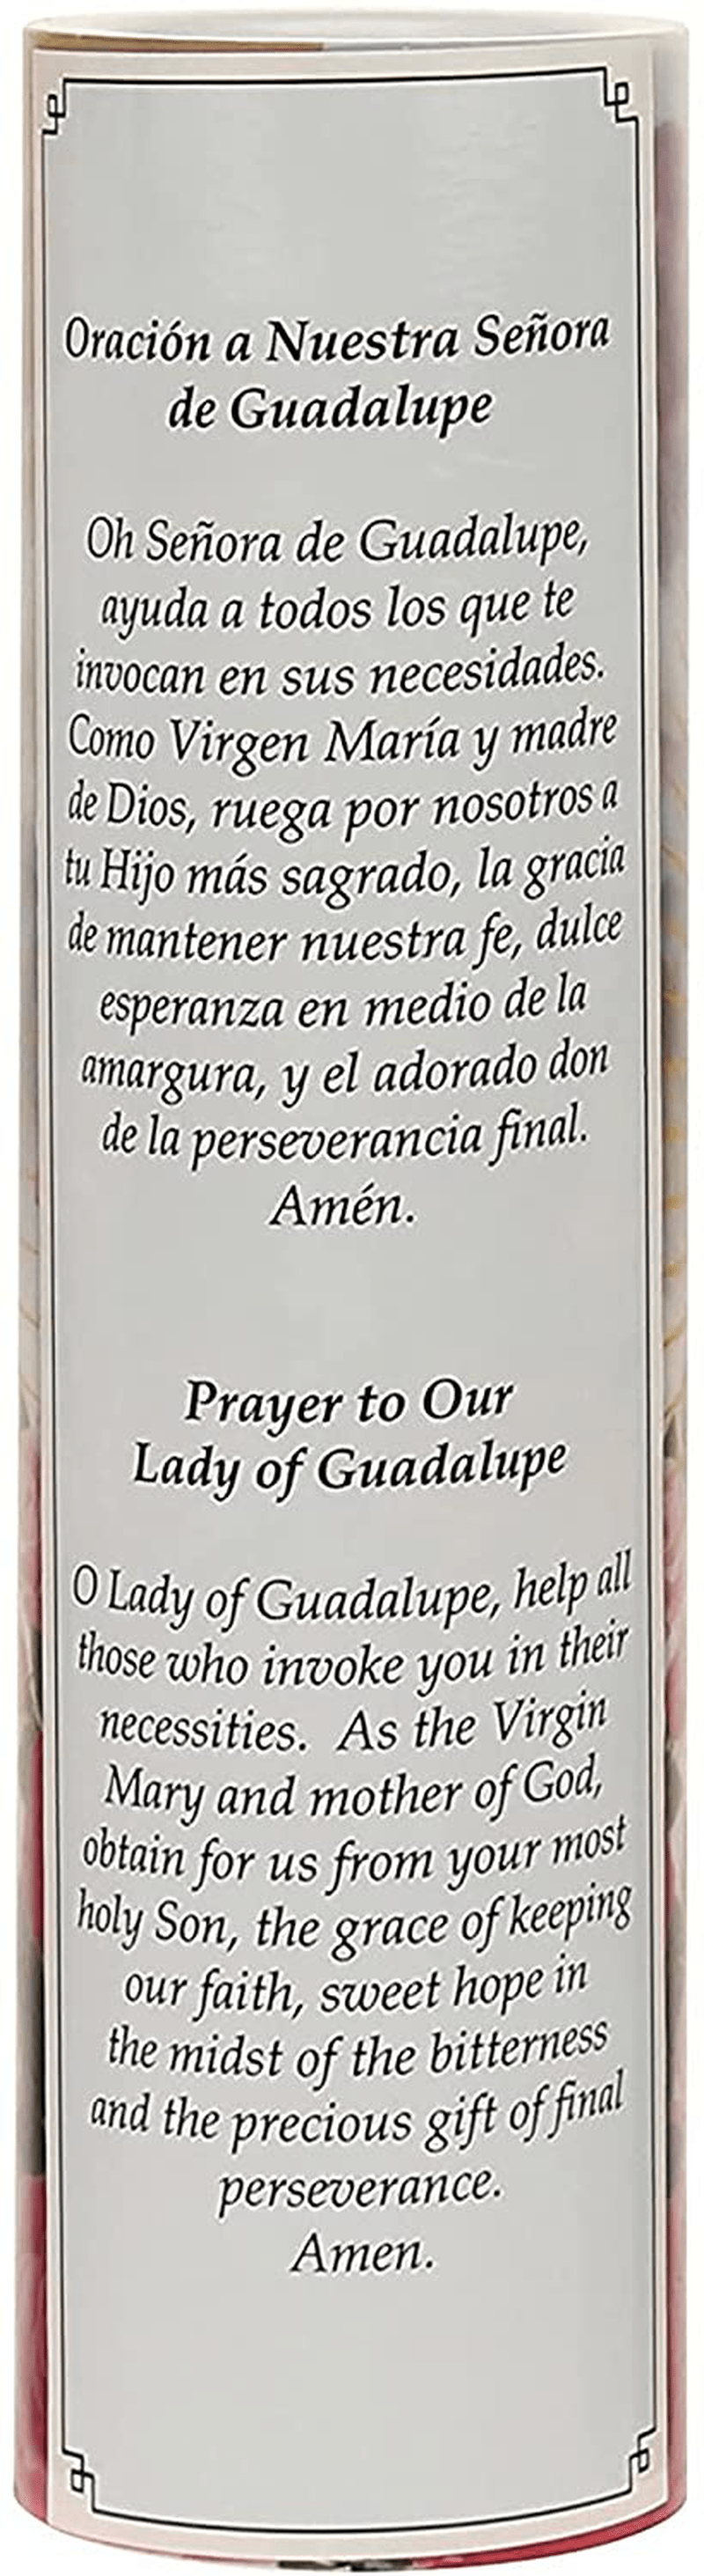 Virgin of Guadalupe Flameless LED Prayer Candle, Unique Religious Decoration, Gift Idea for Mothers Day, Birthday, or Any Holiday